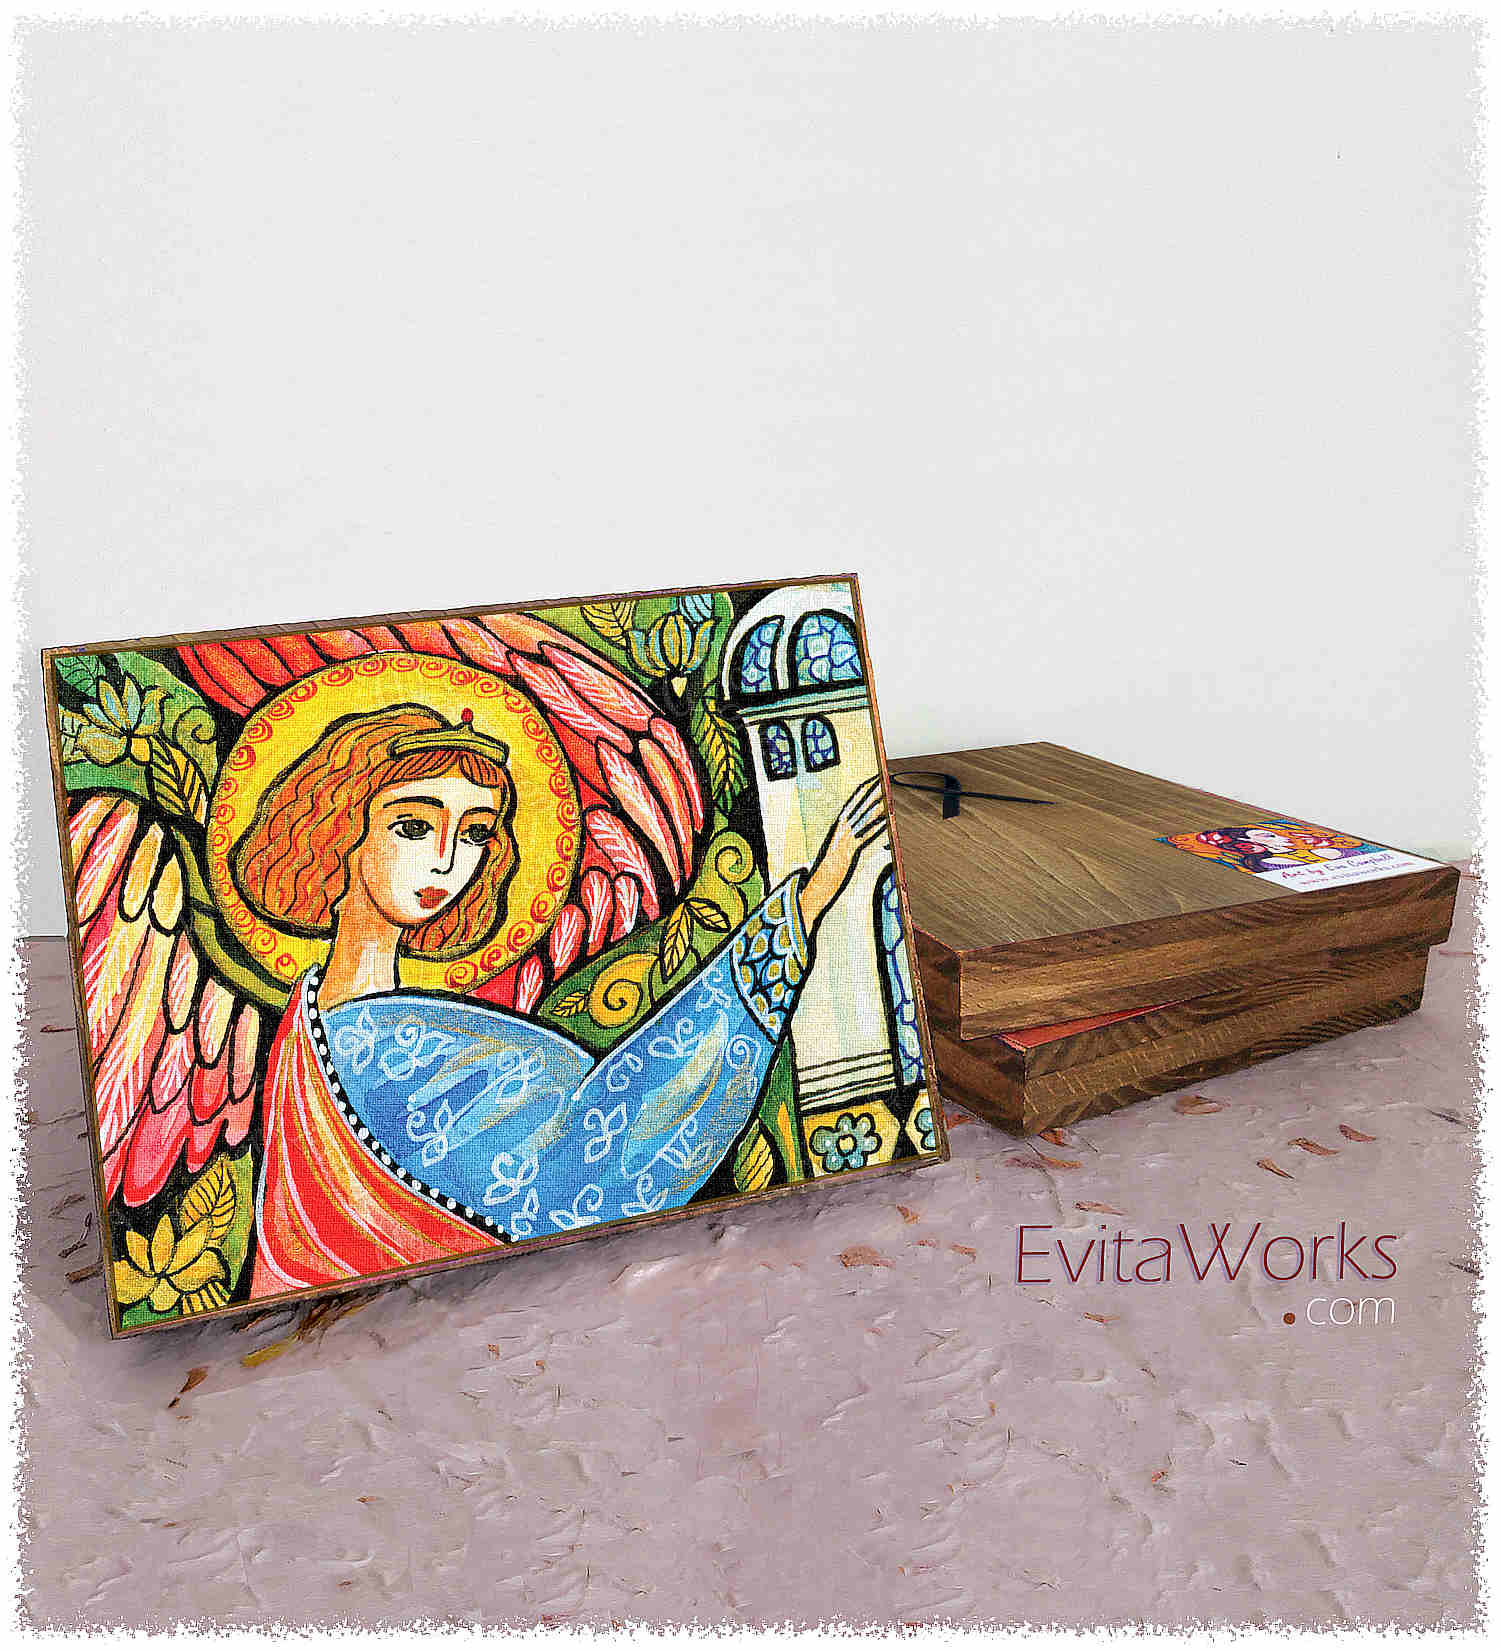 Hit to learn about "Angel 34, Christian art" on woodblocks